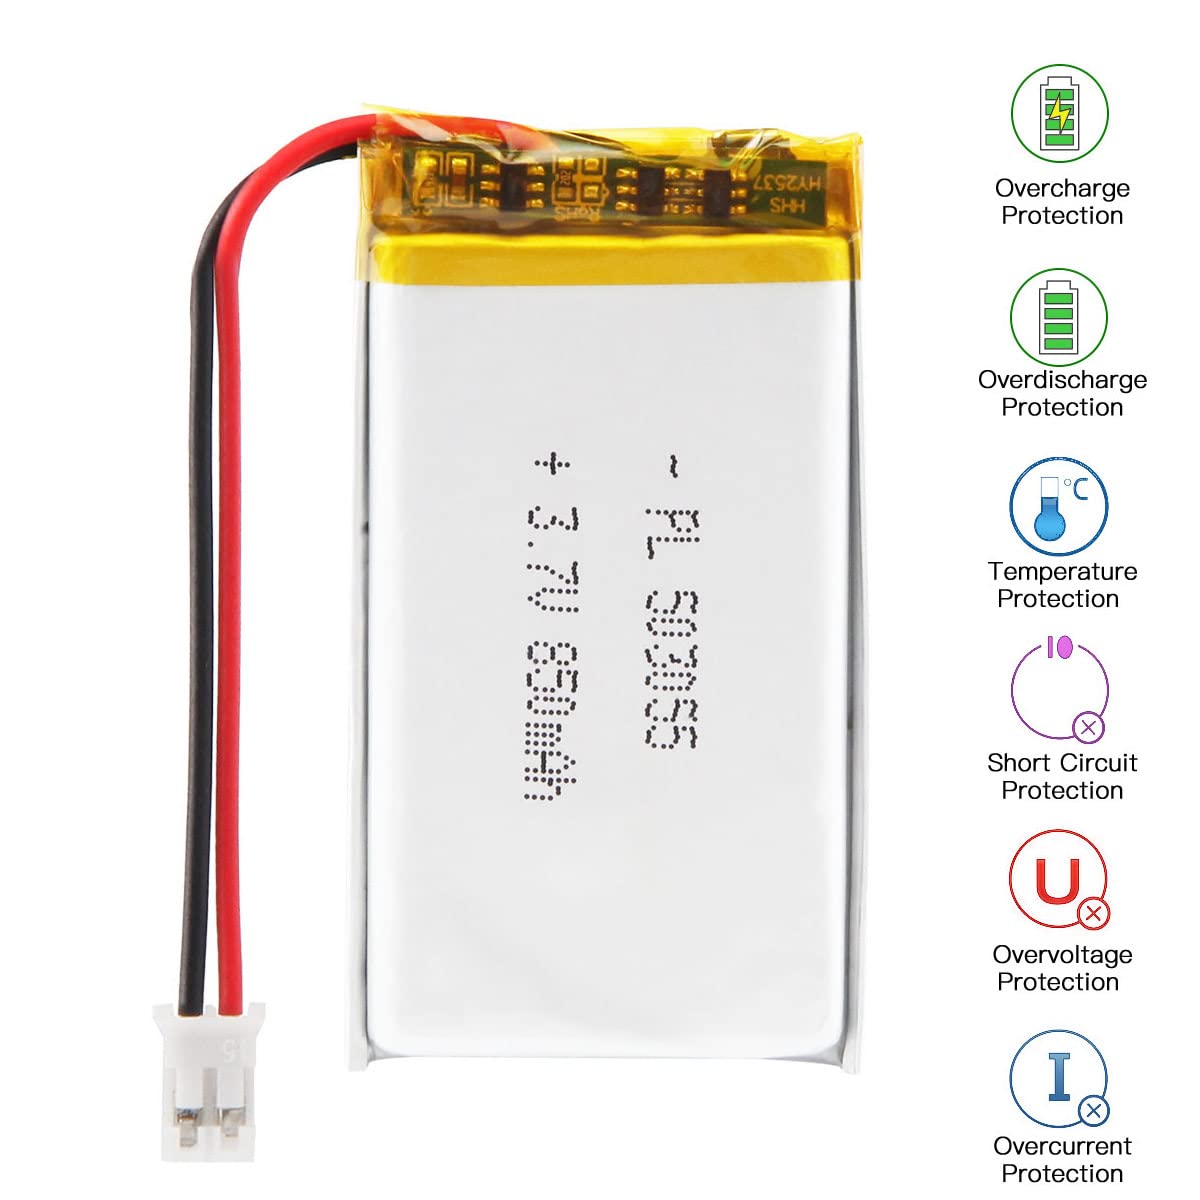 AKZYTUE 3.7V 850mAh 503055 Lipo Battery Rechargeable Lithium Polymer ion Battery with JST Connector